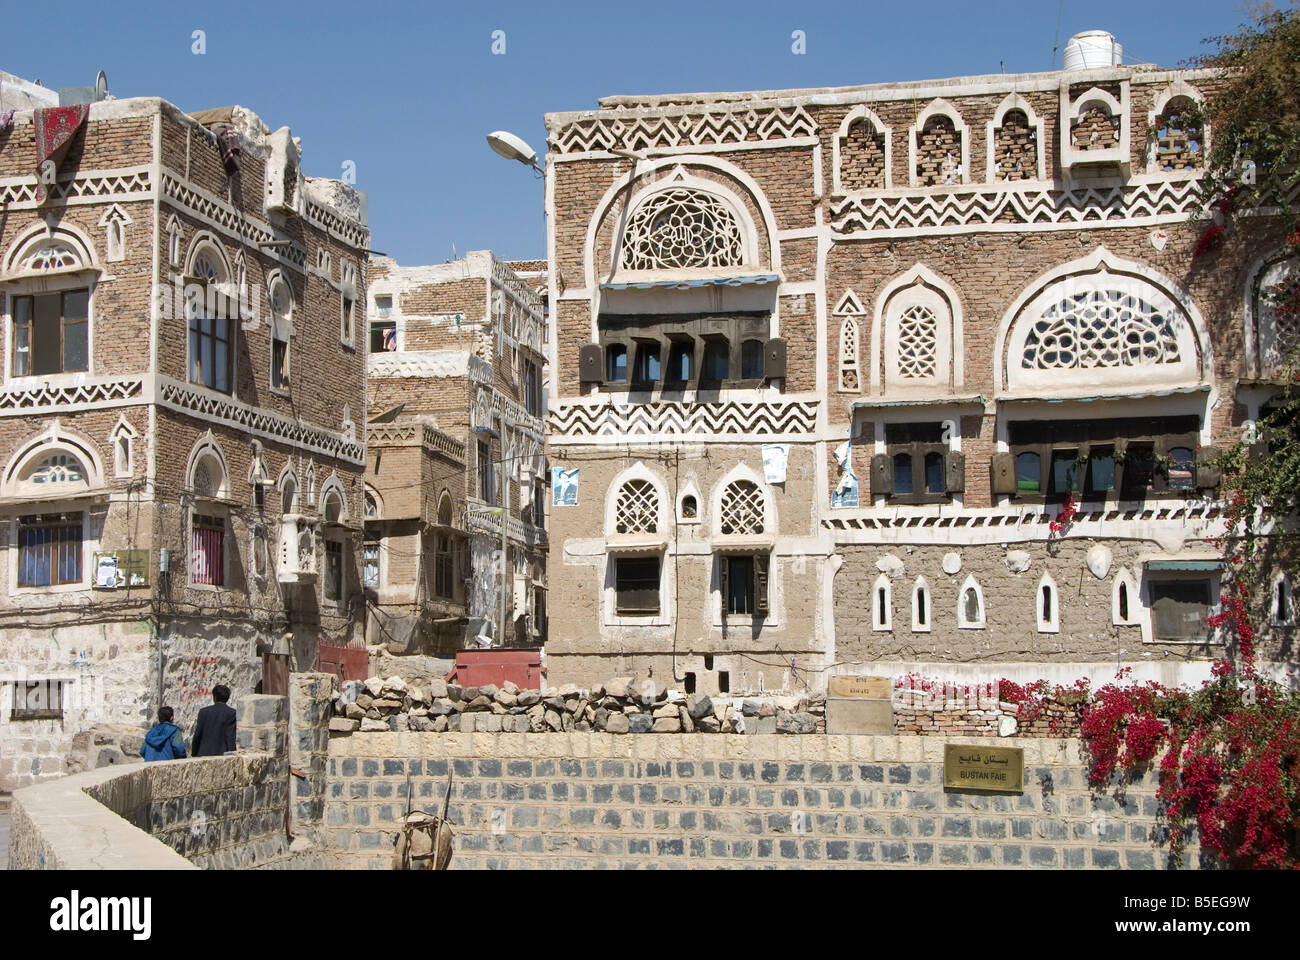 Traditional ornamented brick architecture on houses Old City Sana a UNESCO World Heritage Site capital of Yemen Middle East Stock Photo